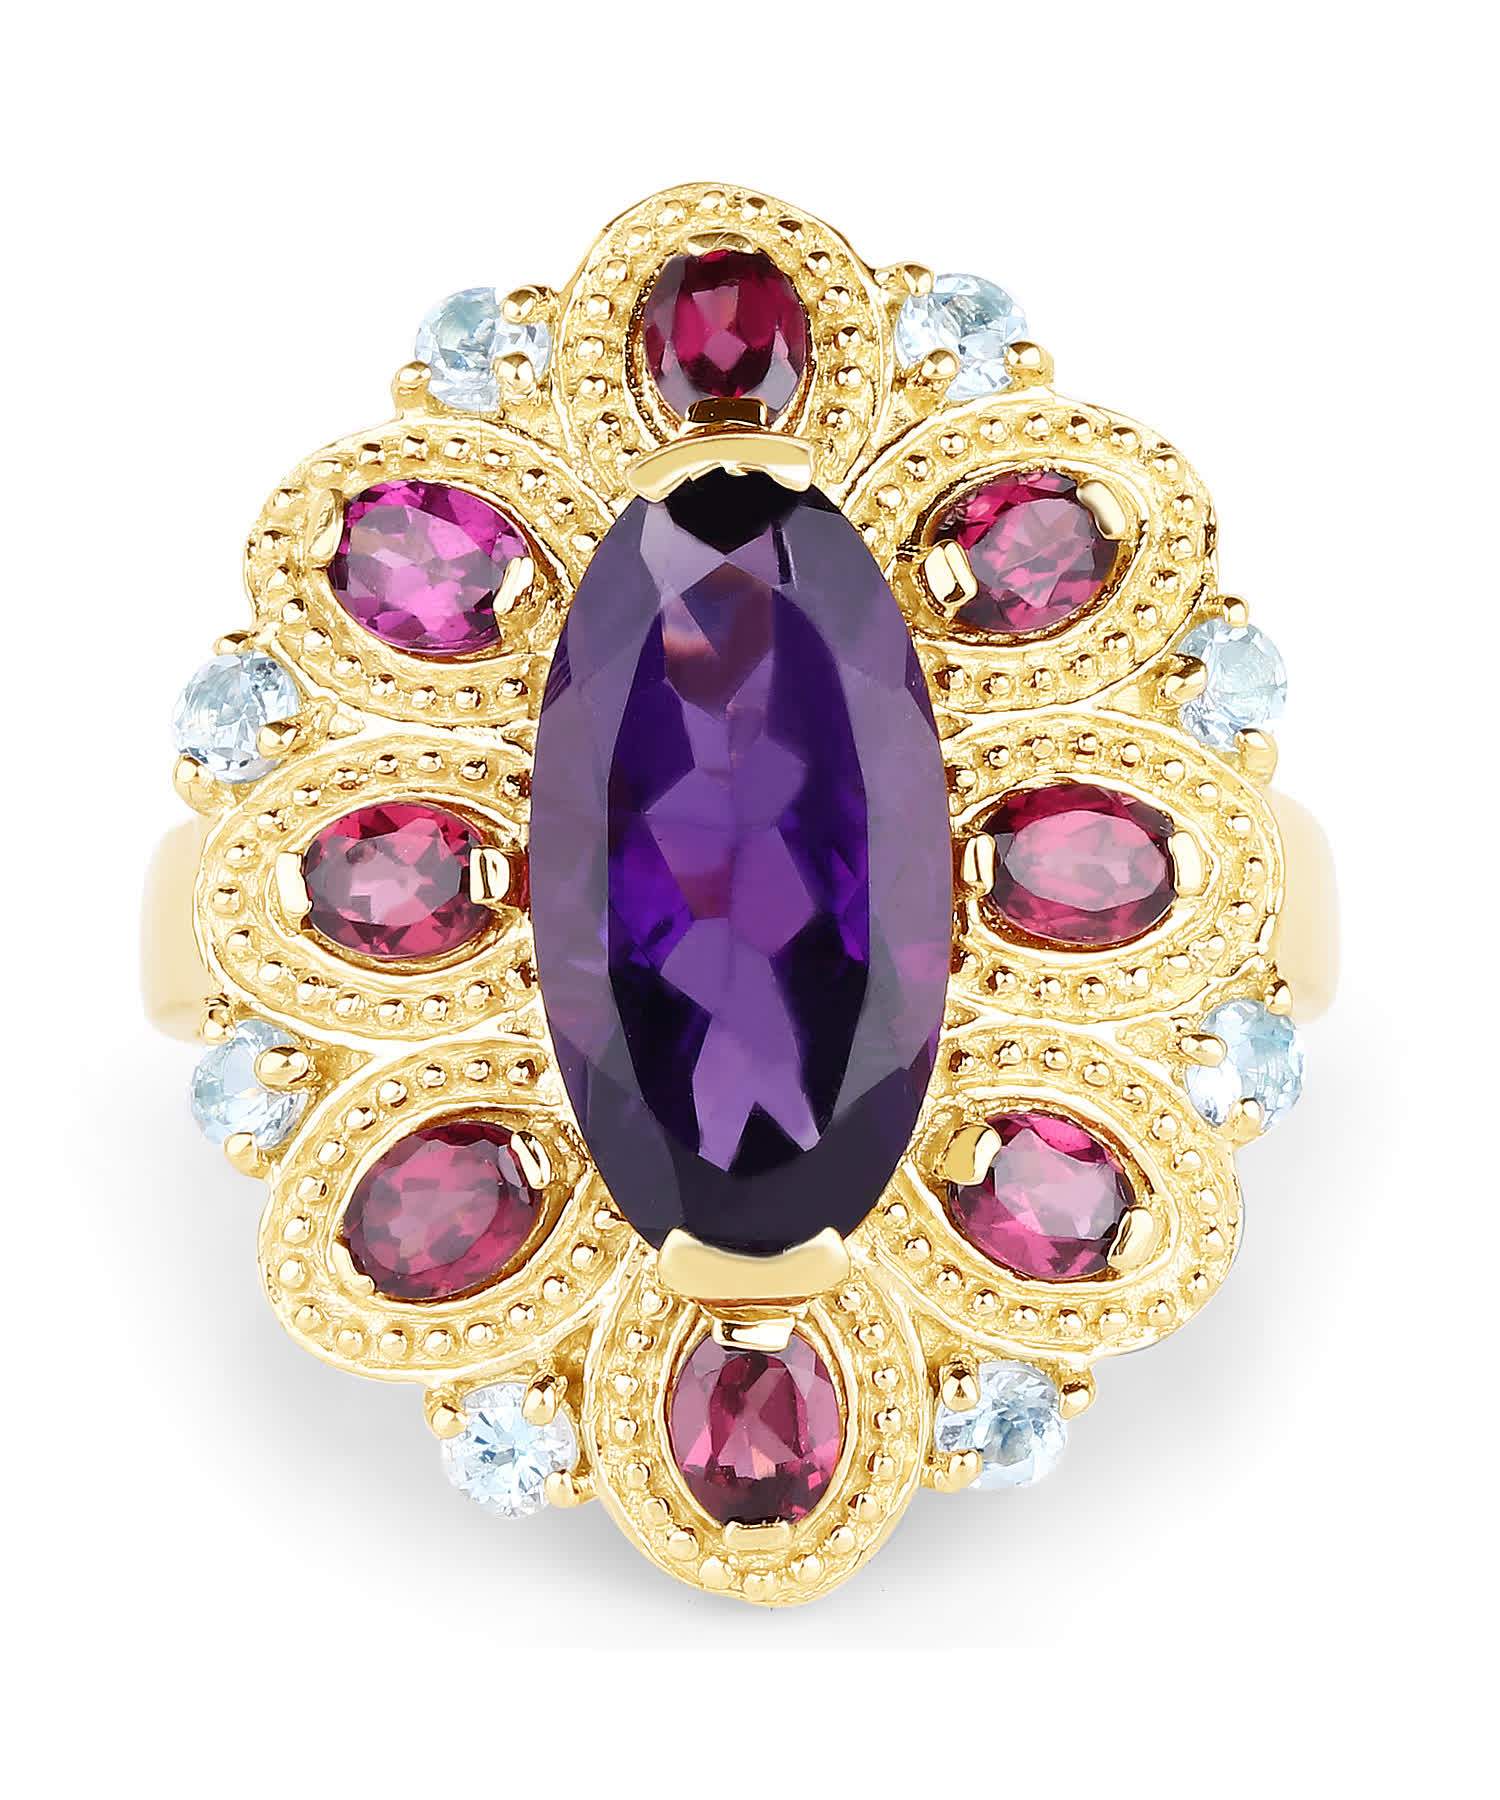 6.80ctw Natural Amethyst, Rhodolite Garnet and Sky Blue Topaz 14k Gold Plated 925 Sterling Silver Cocktail Ring View 3